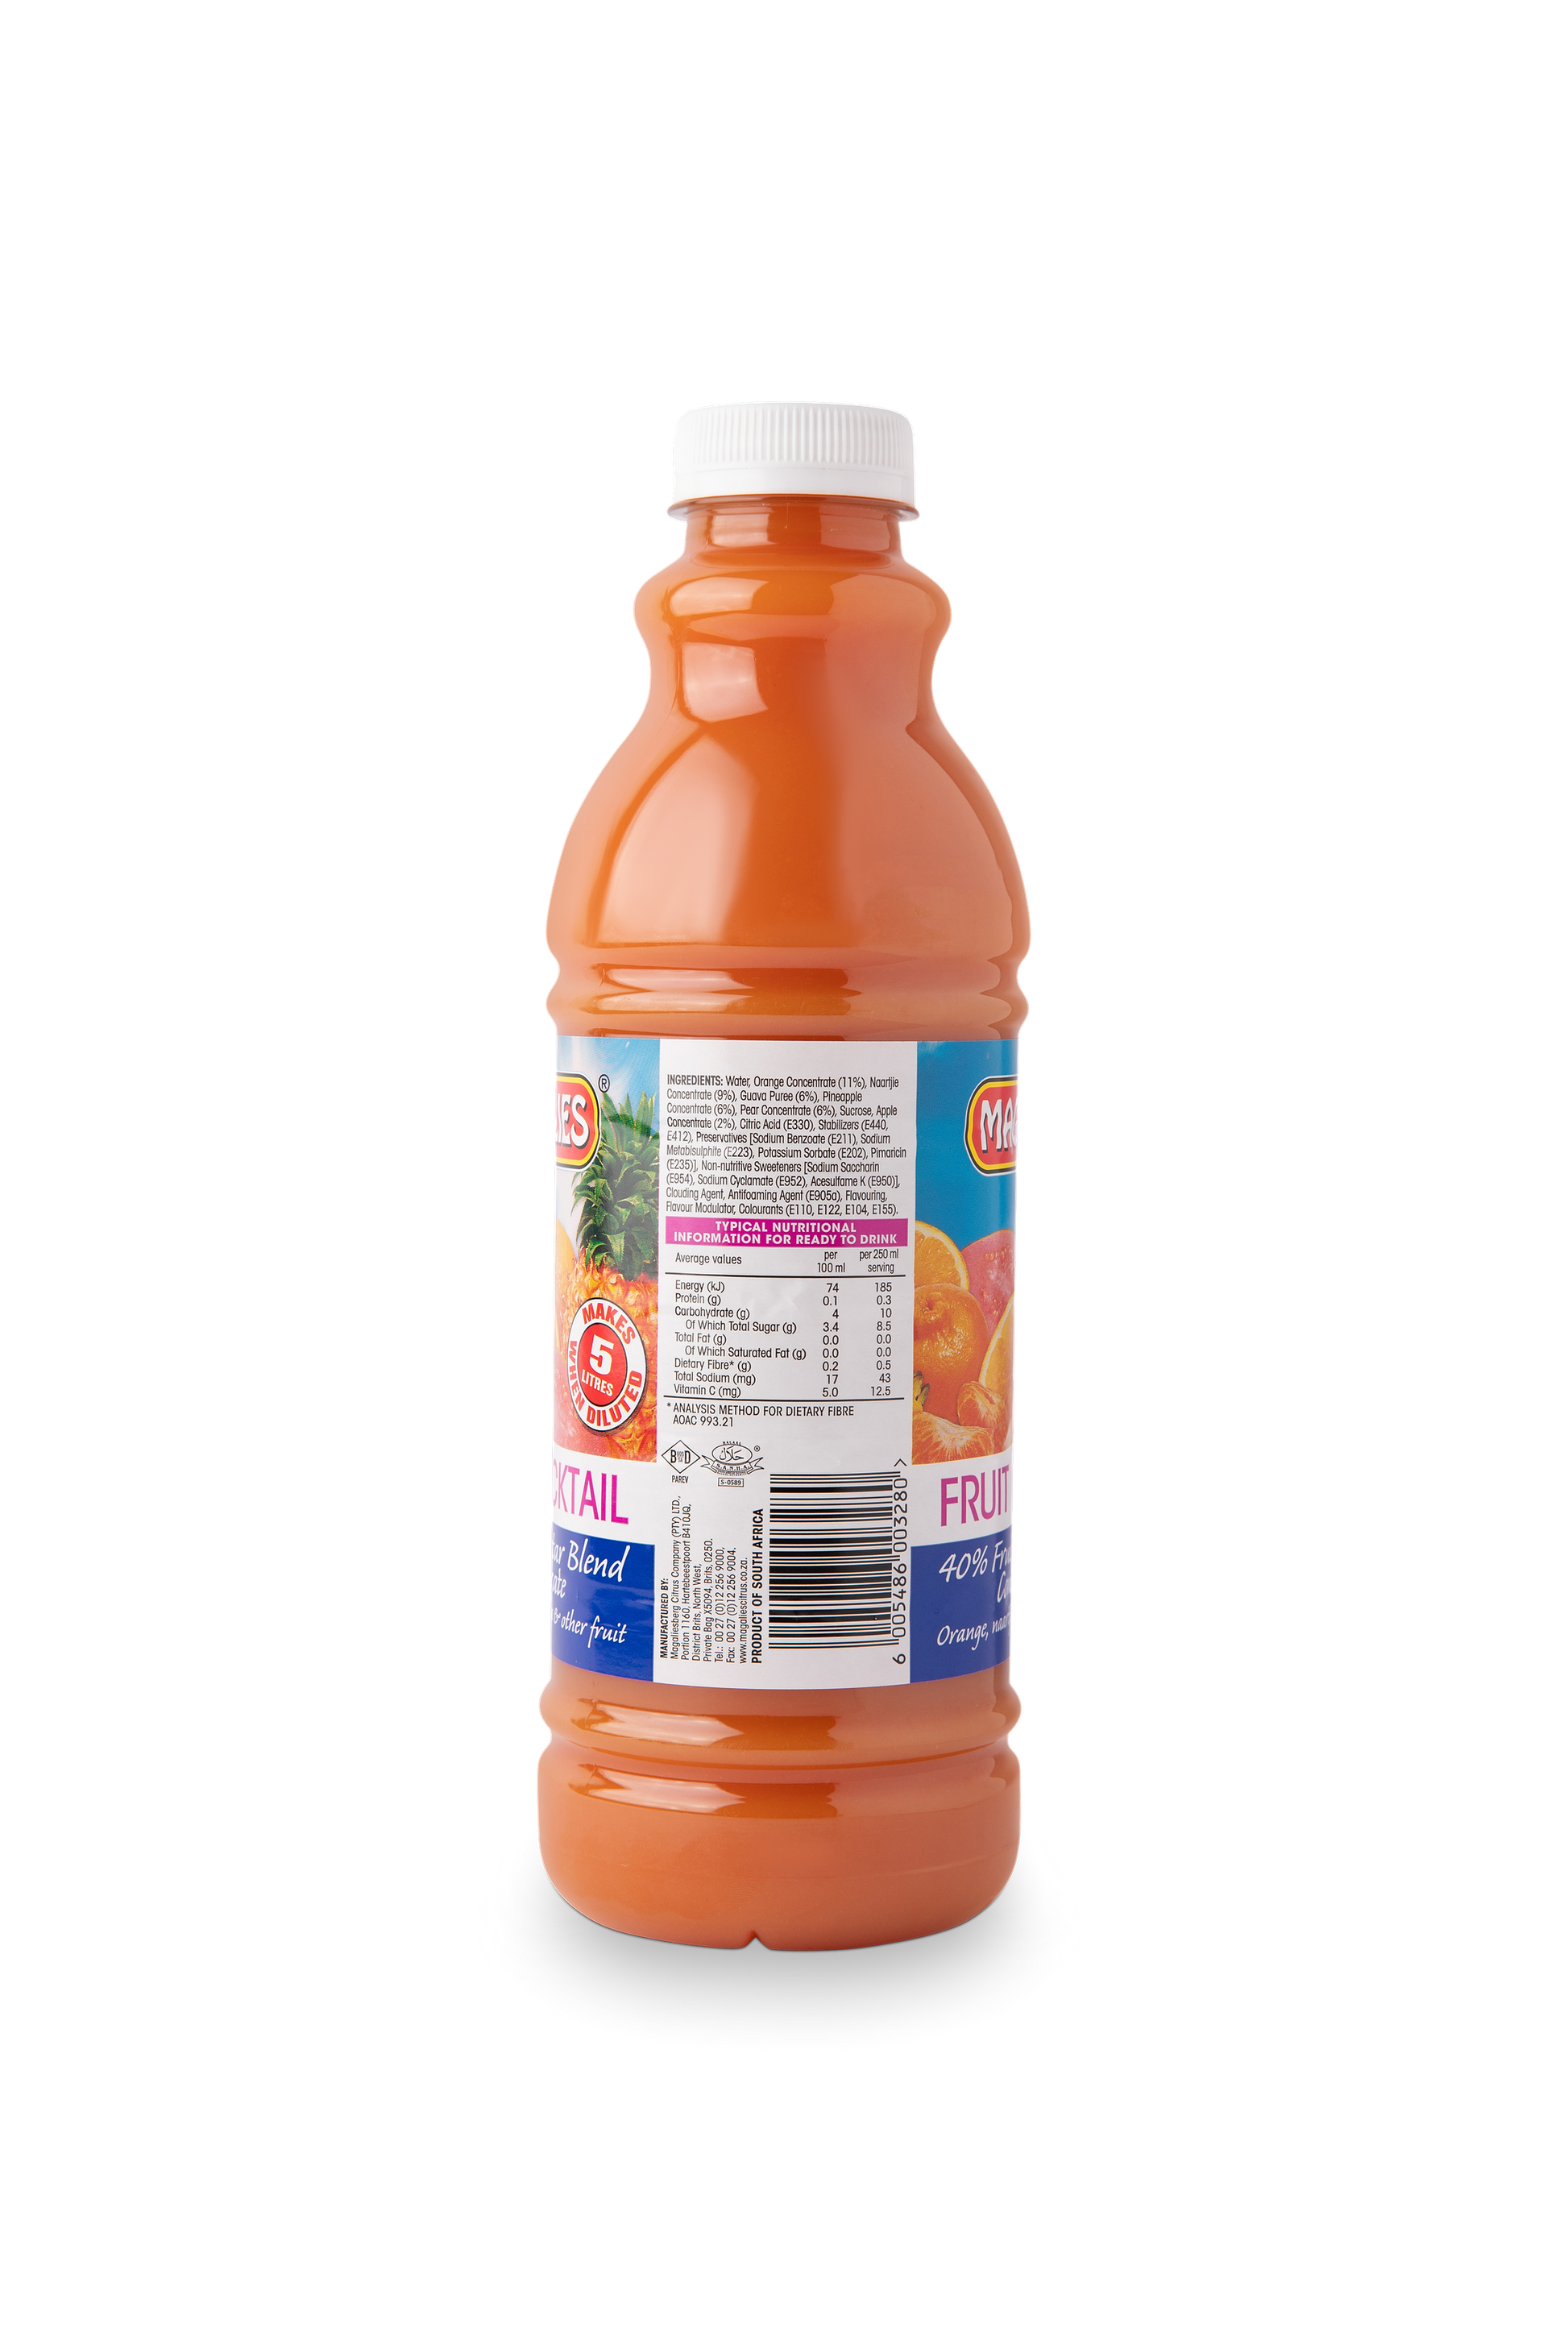 Magalies 1 litre Fruit Cocktail 40% 1+4 fruit nectar concentrate